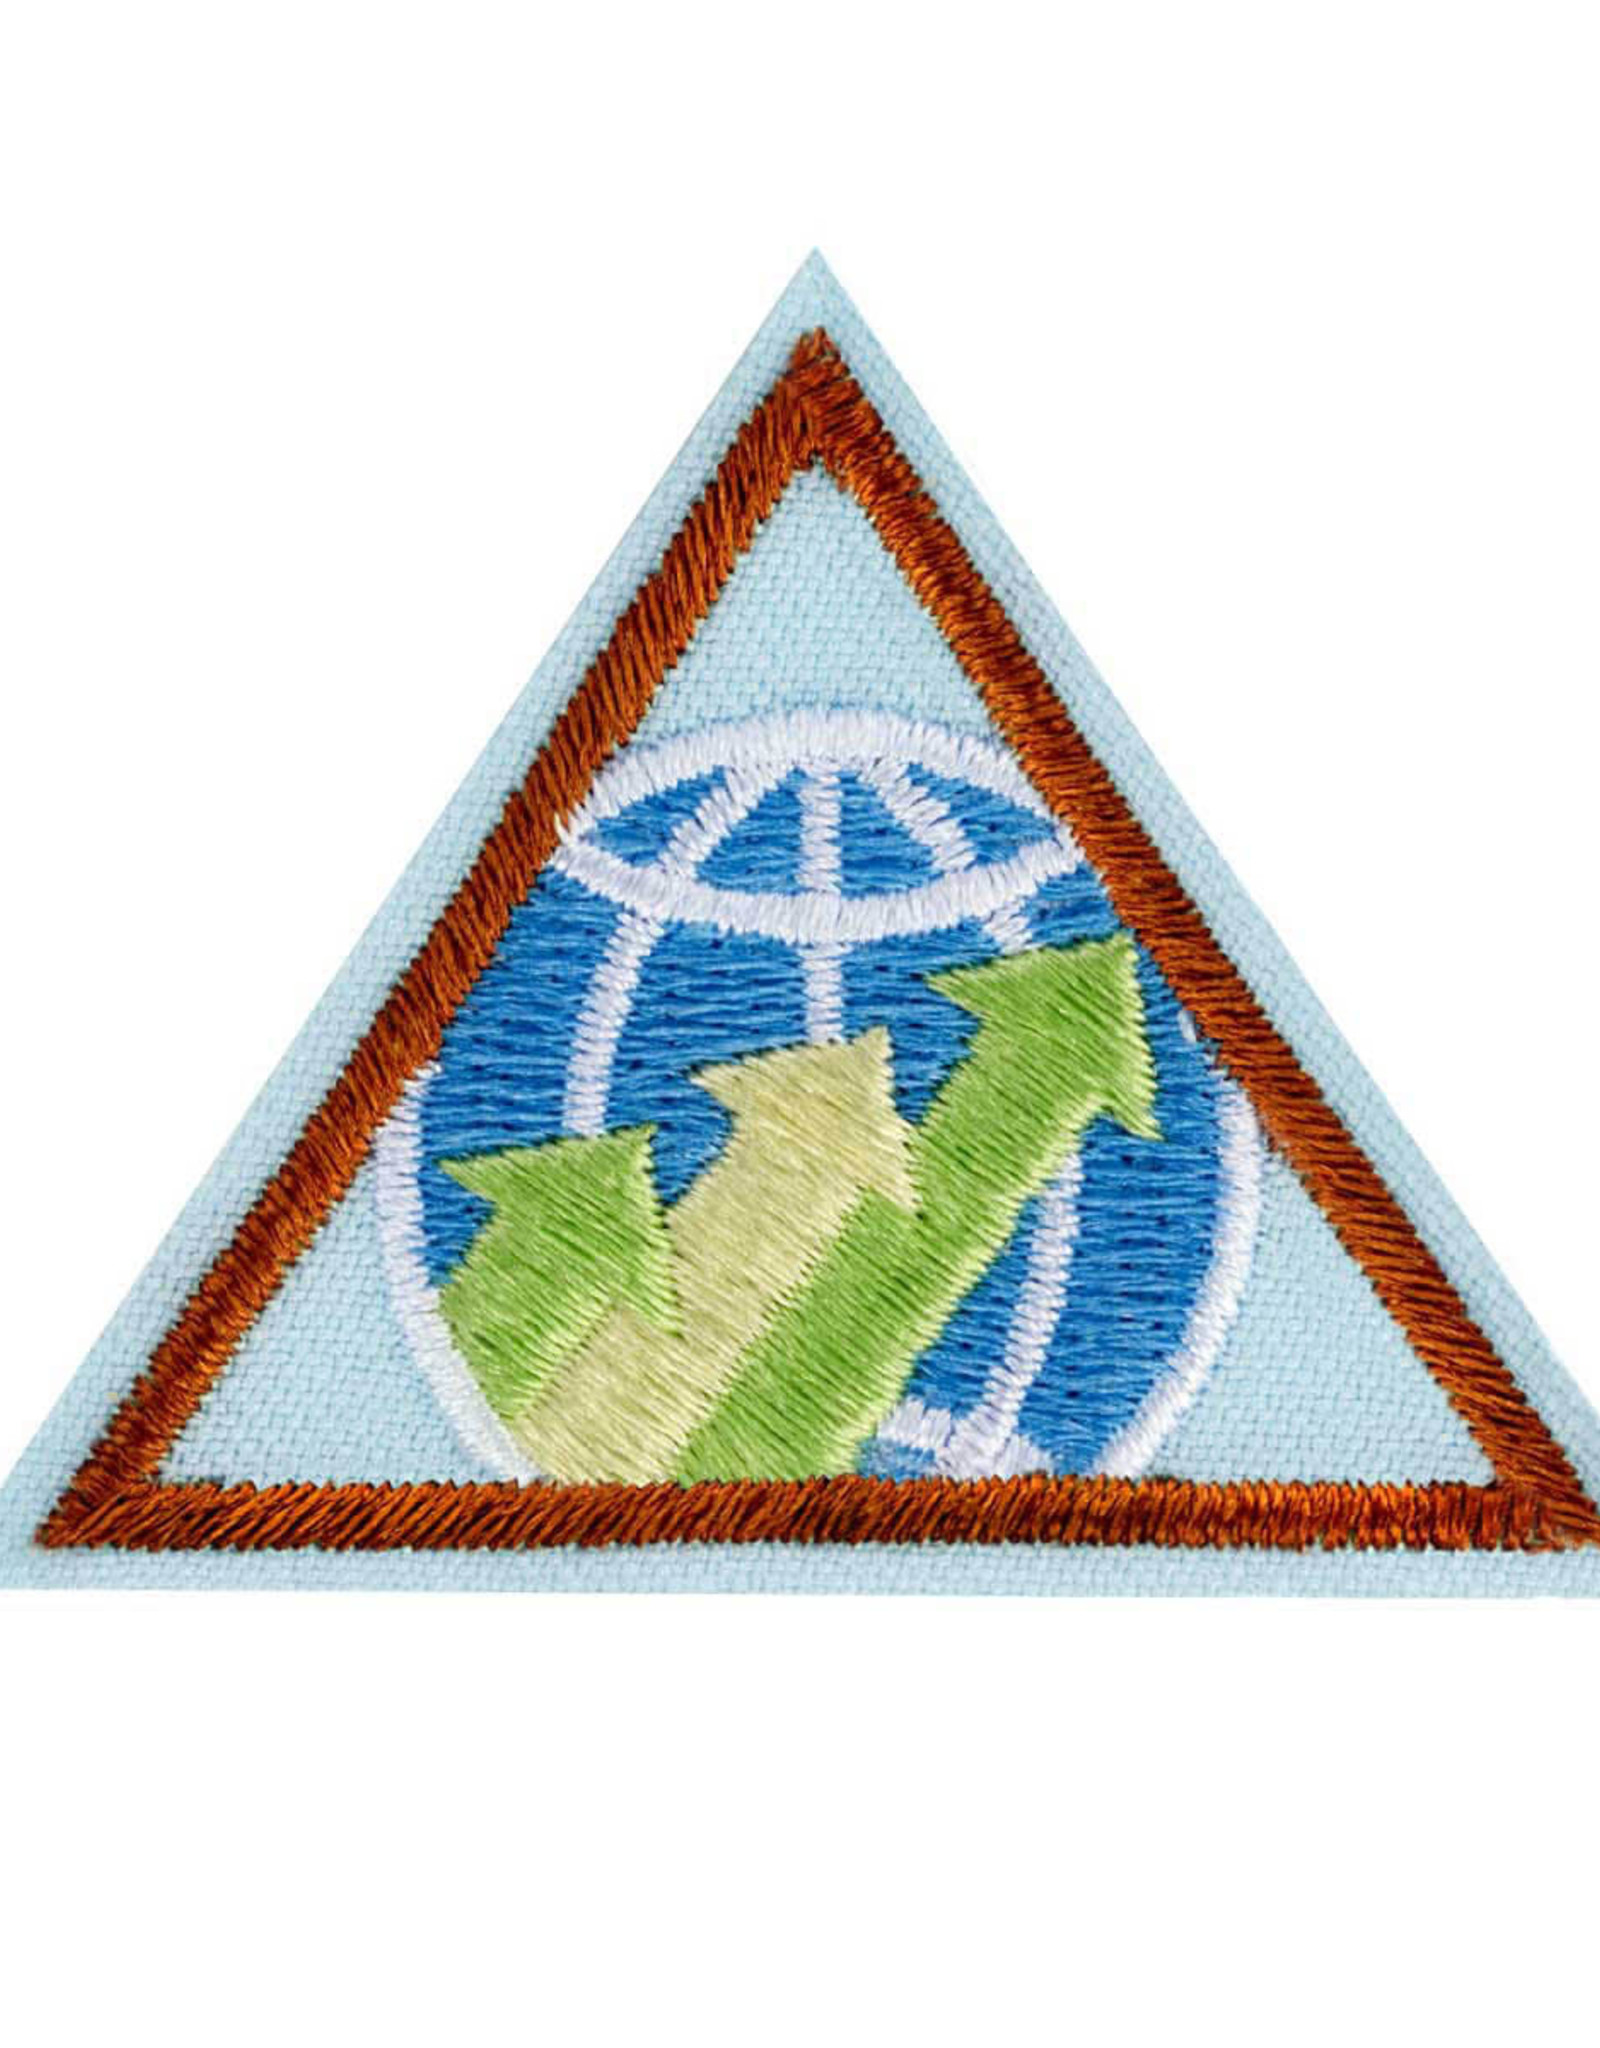 GIRL SCOUTS OF THE USA Brownie Global Action Award Year 2  Badge